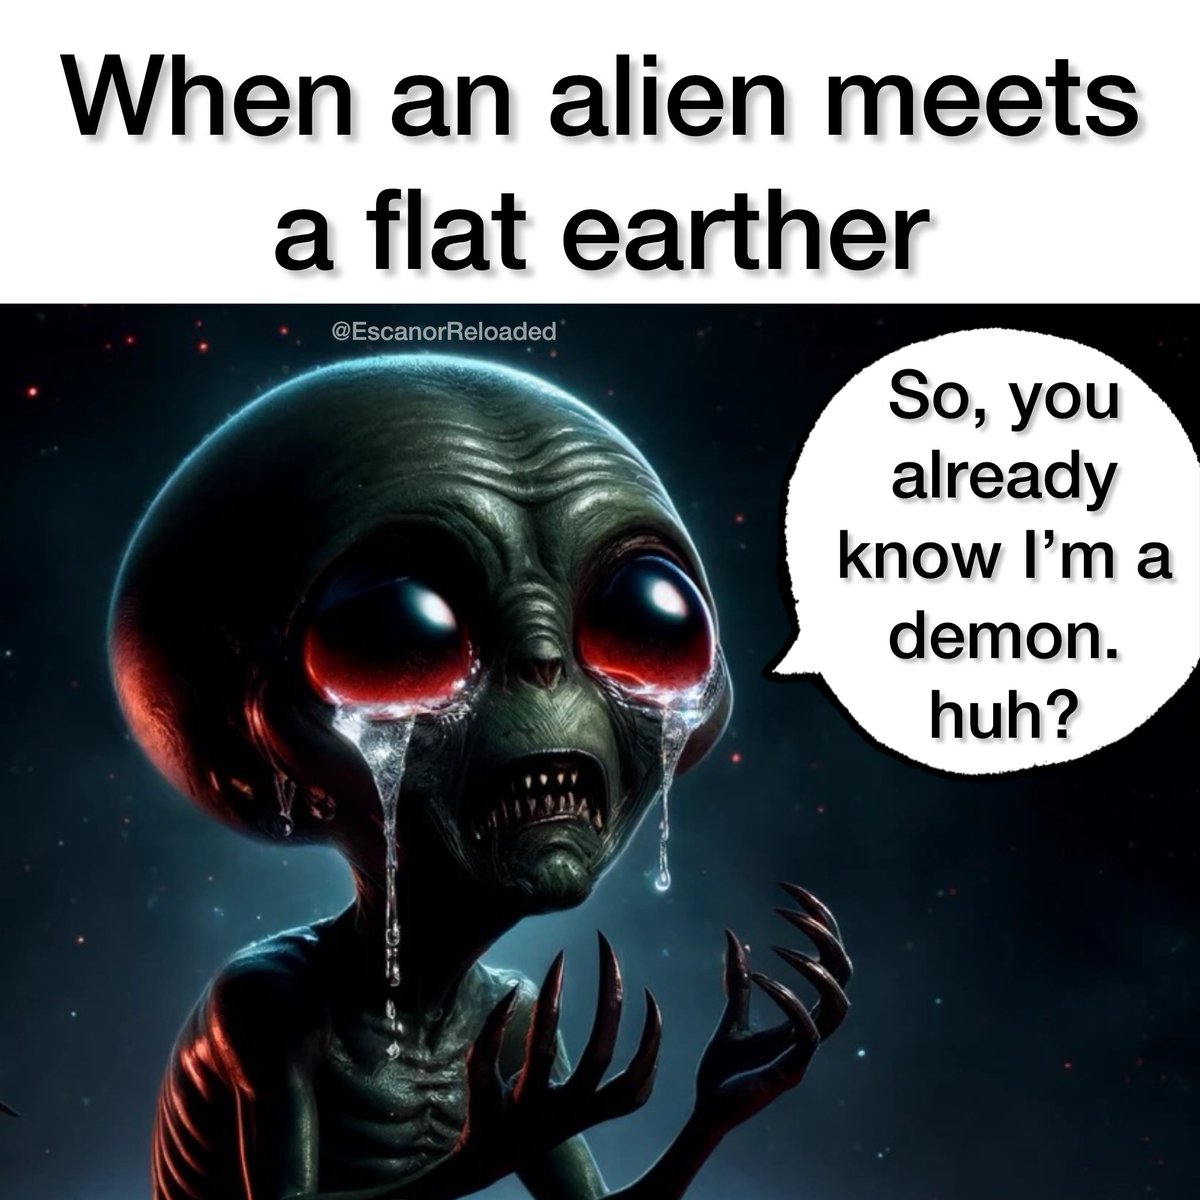 Flat earth is one of the skeleton keys unlocking the doors to hidden truths.